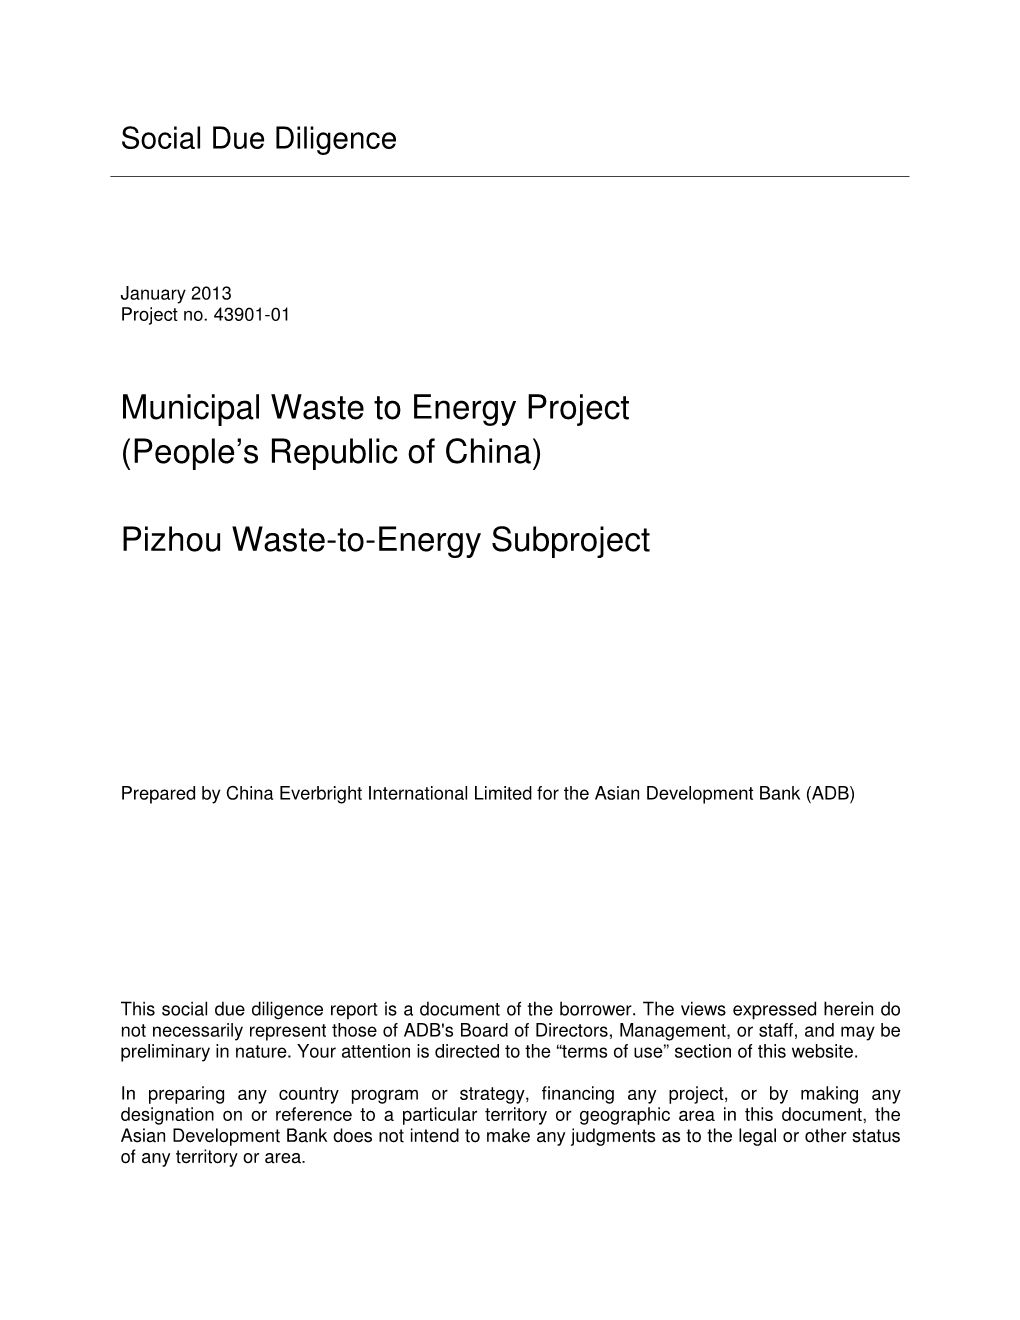 Municipal Waste to Energy Project (People’S Republic of China)